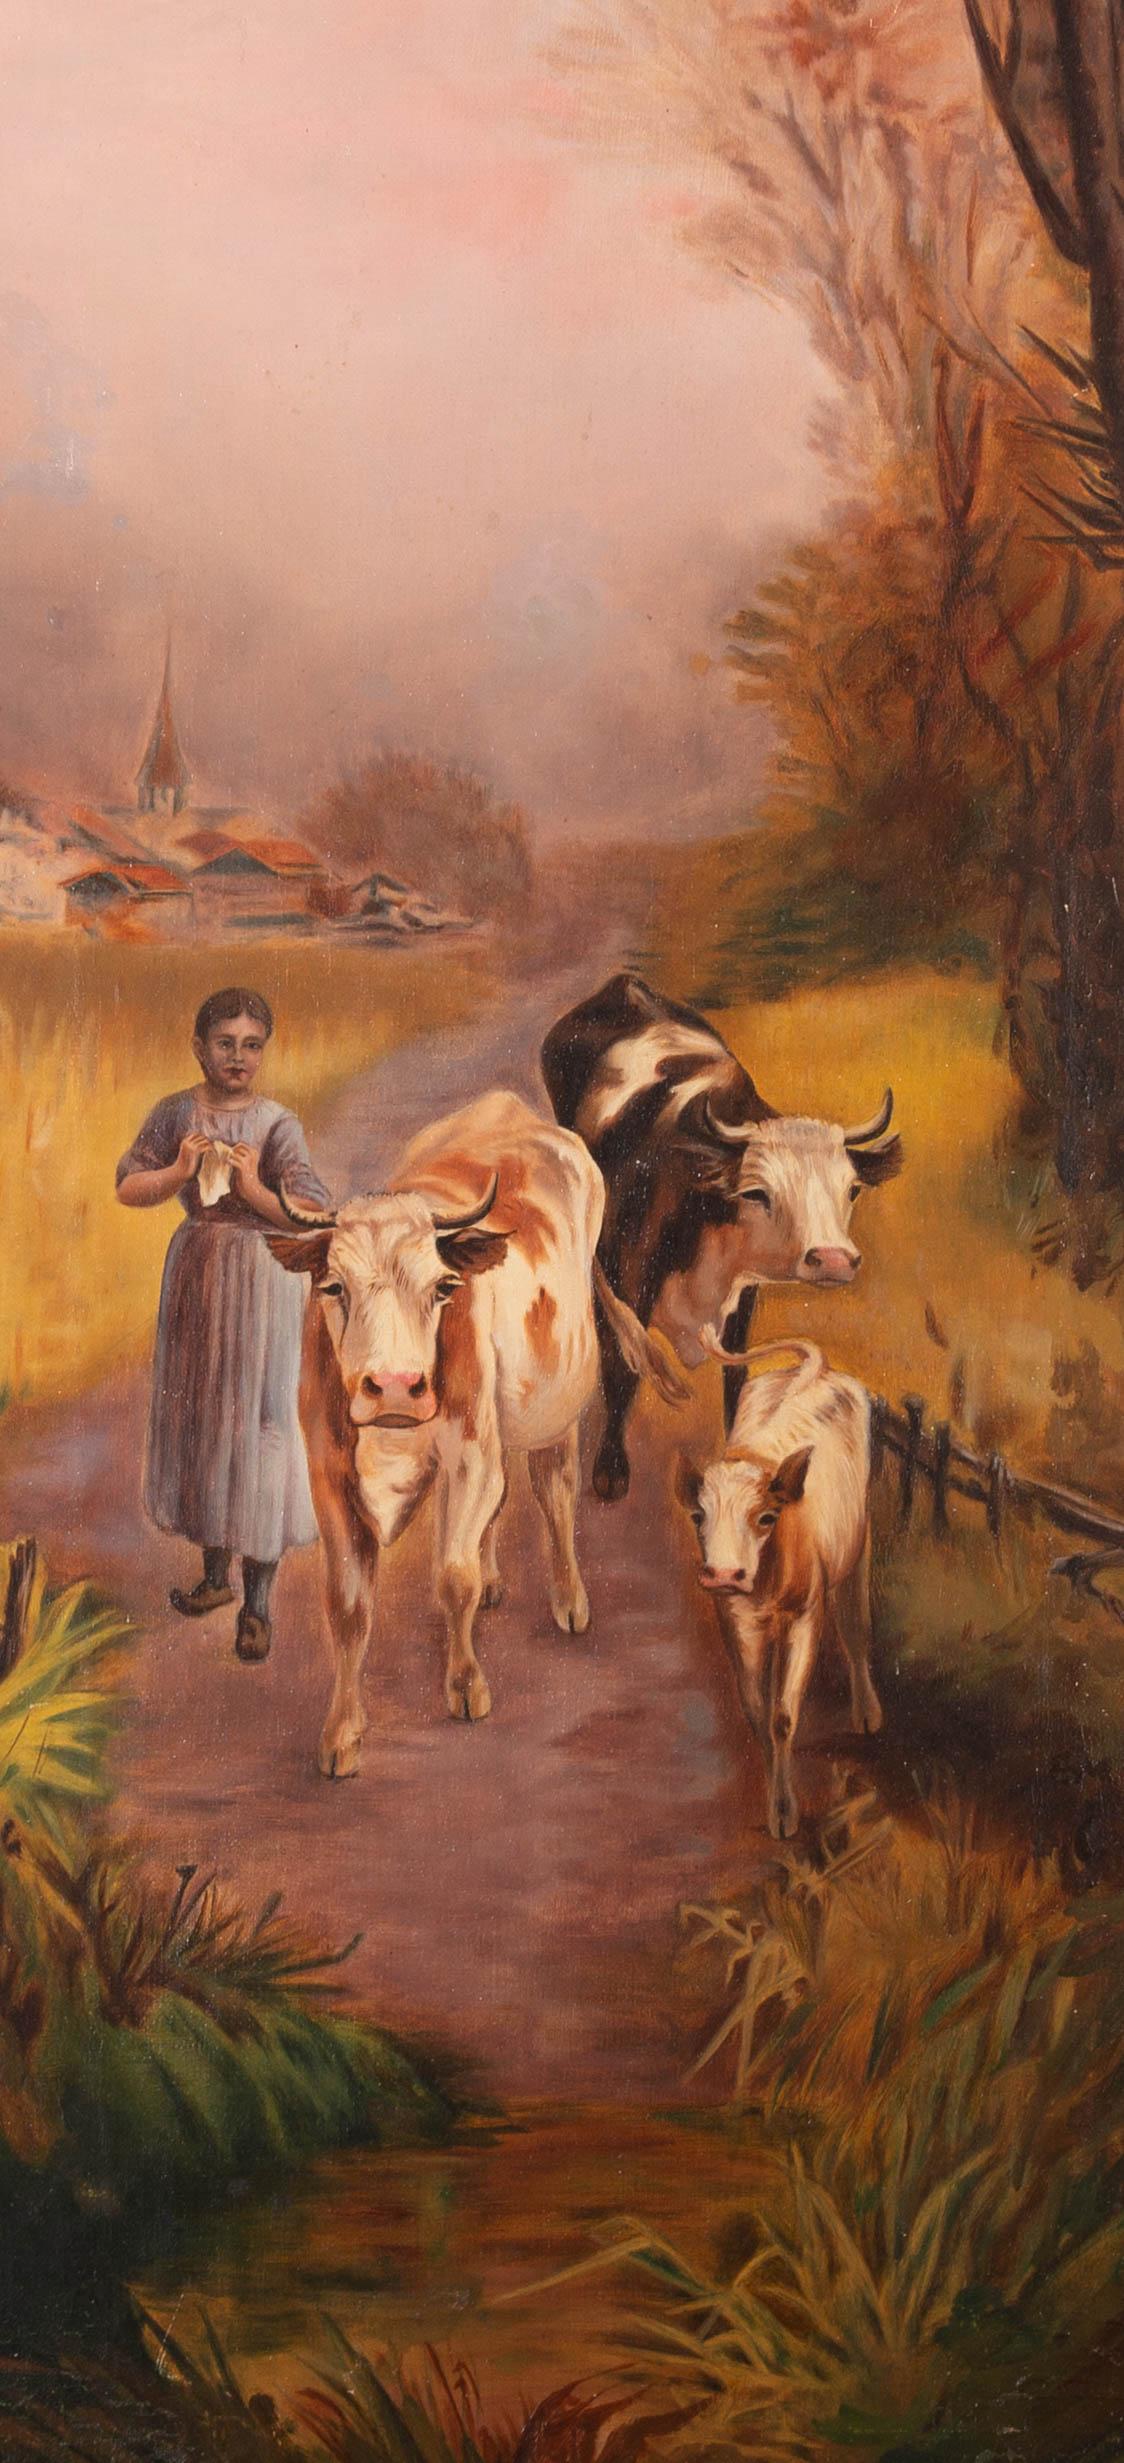 Dream-art Oil painting farmers shepherd with goat cows cattles in field by river 